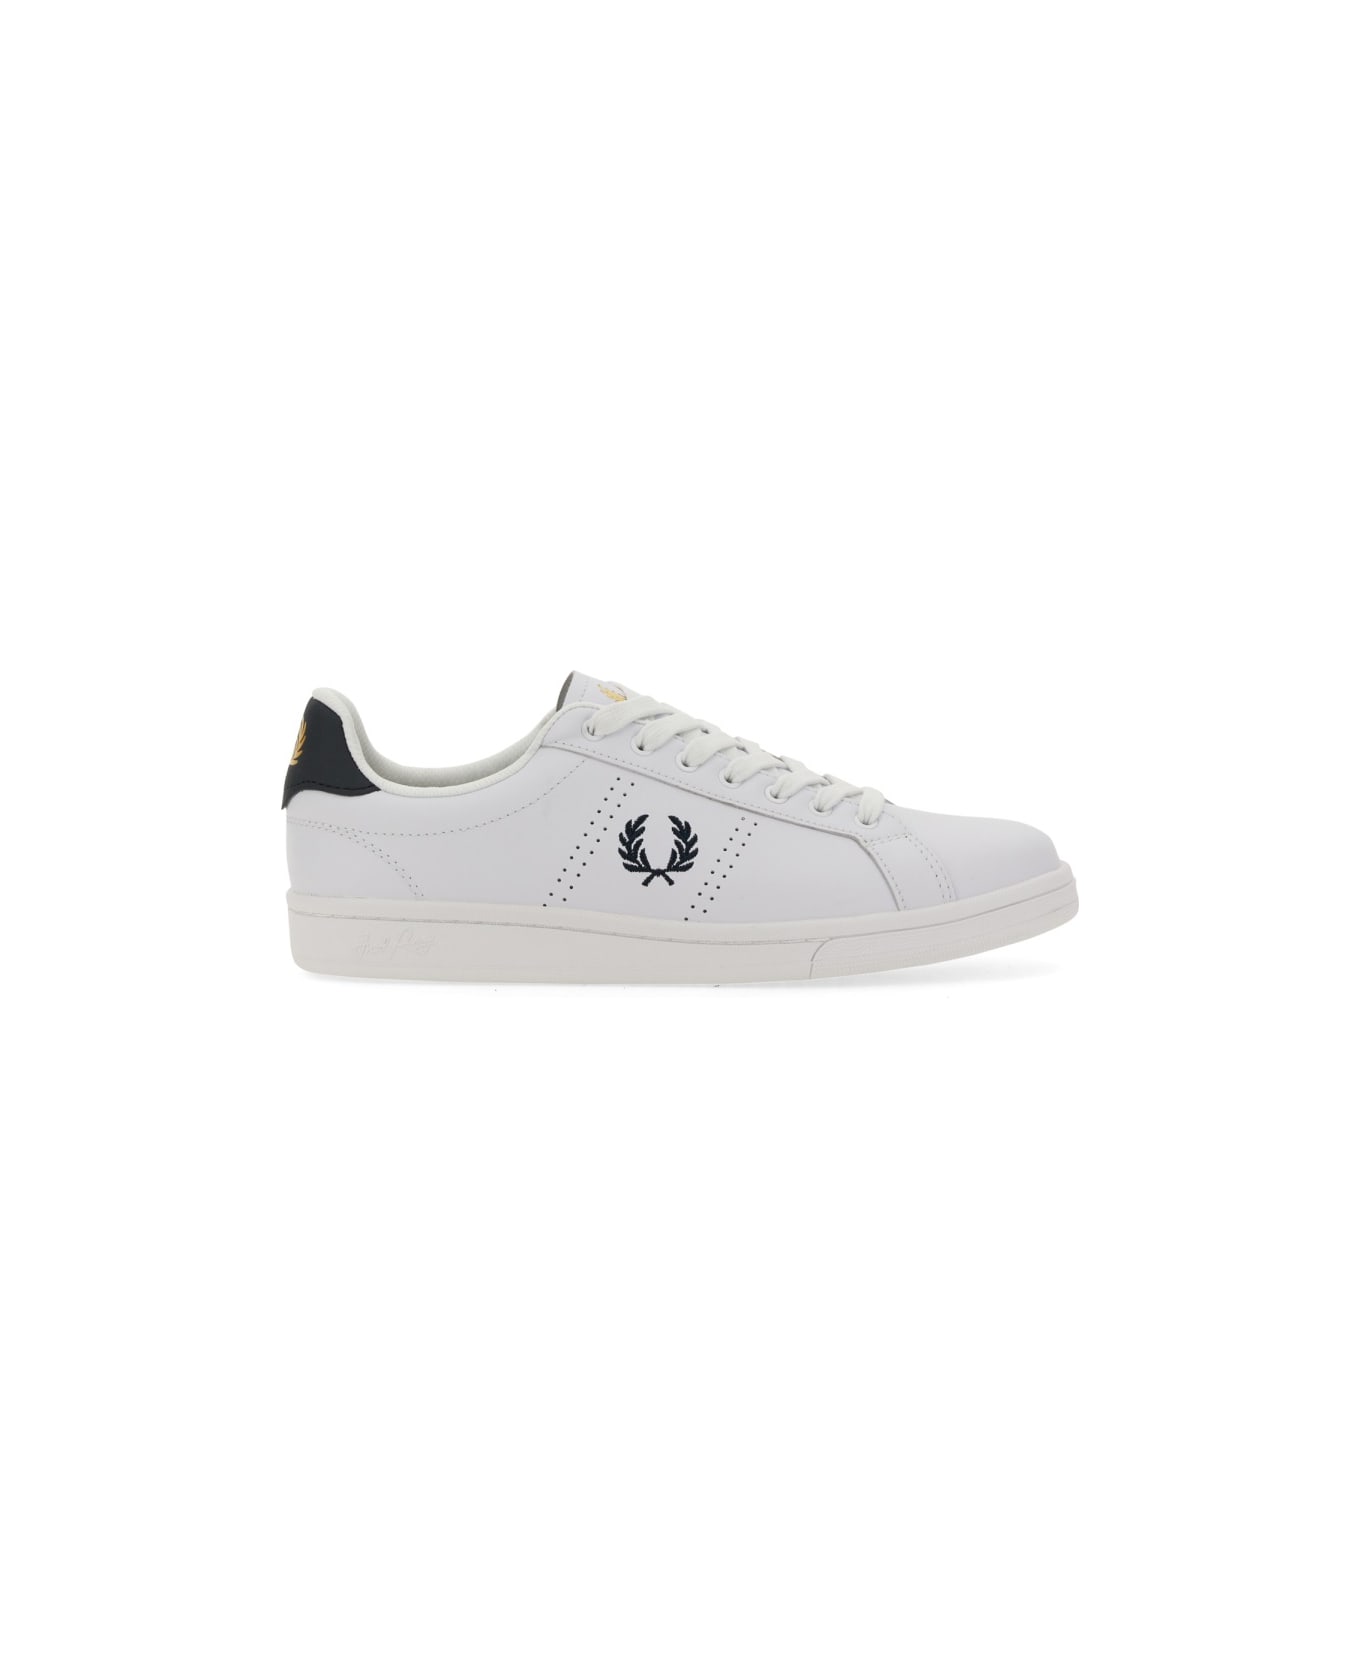 Fred Perry Sneaker "b721" - WHITE スニーカー